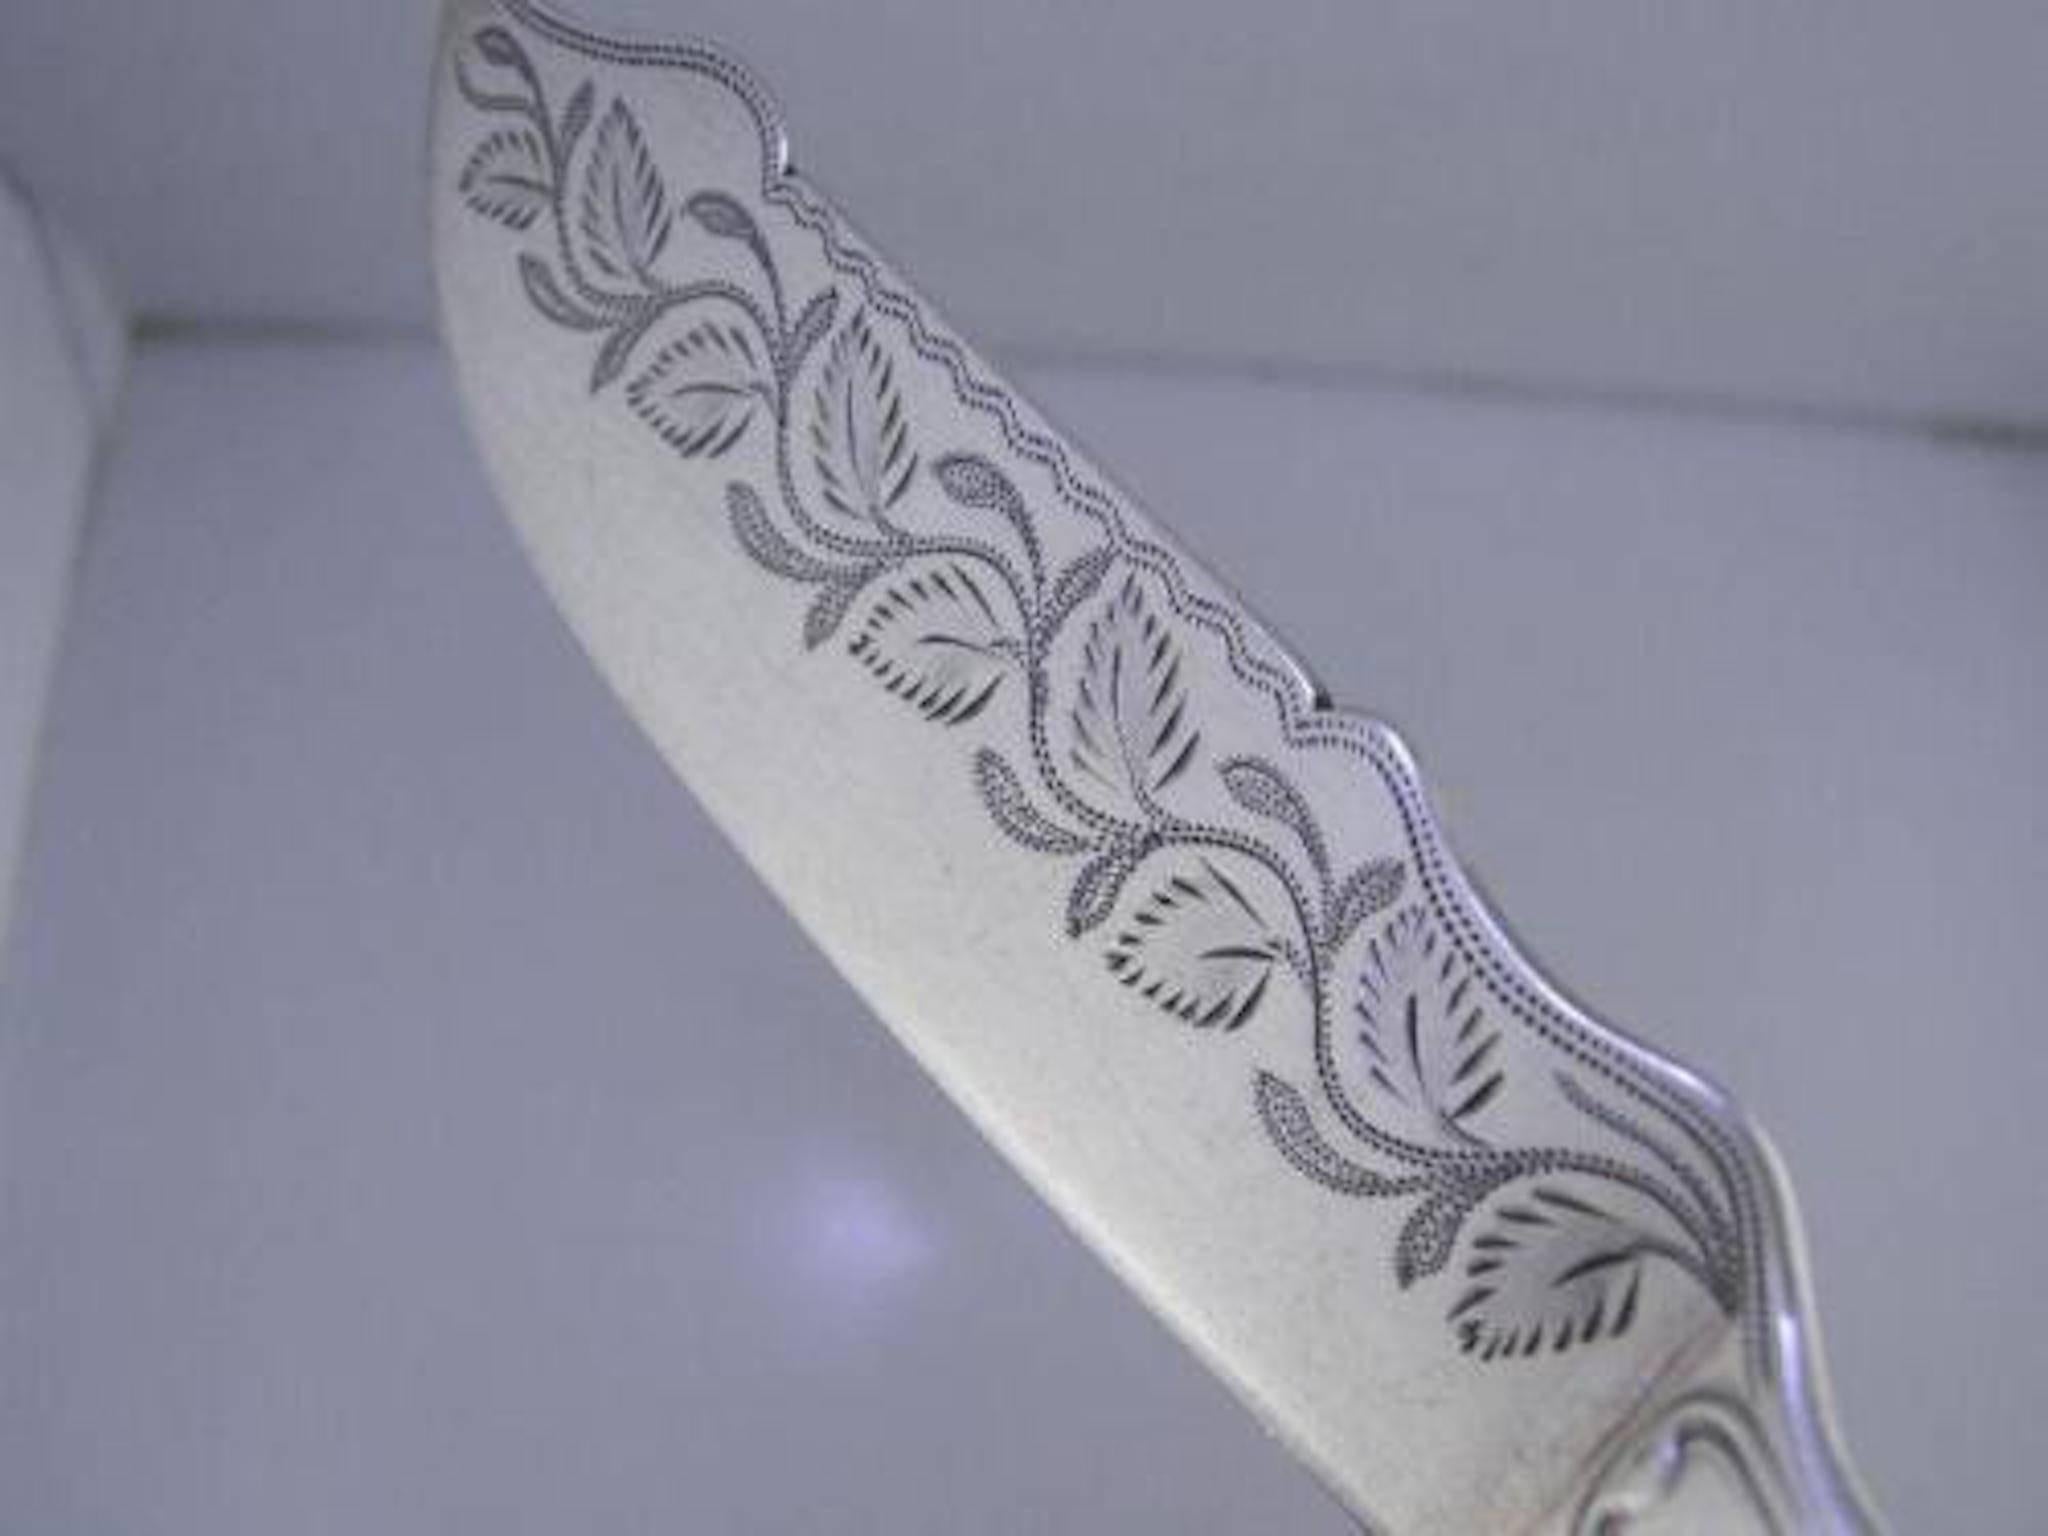 Early coin silver serving knife by R&W Wilson of Philadelphia circa 1825-1846, weighs 1.47 troy ozs.
leaf engraved ~ Coulomb
King / Kings pattern with a engraved blade portion of leaves and vines.